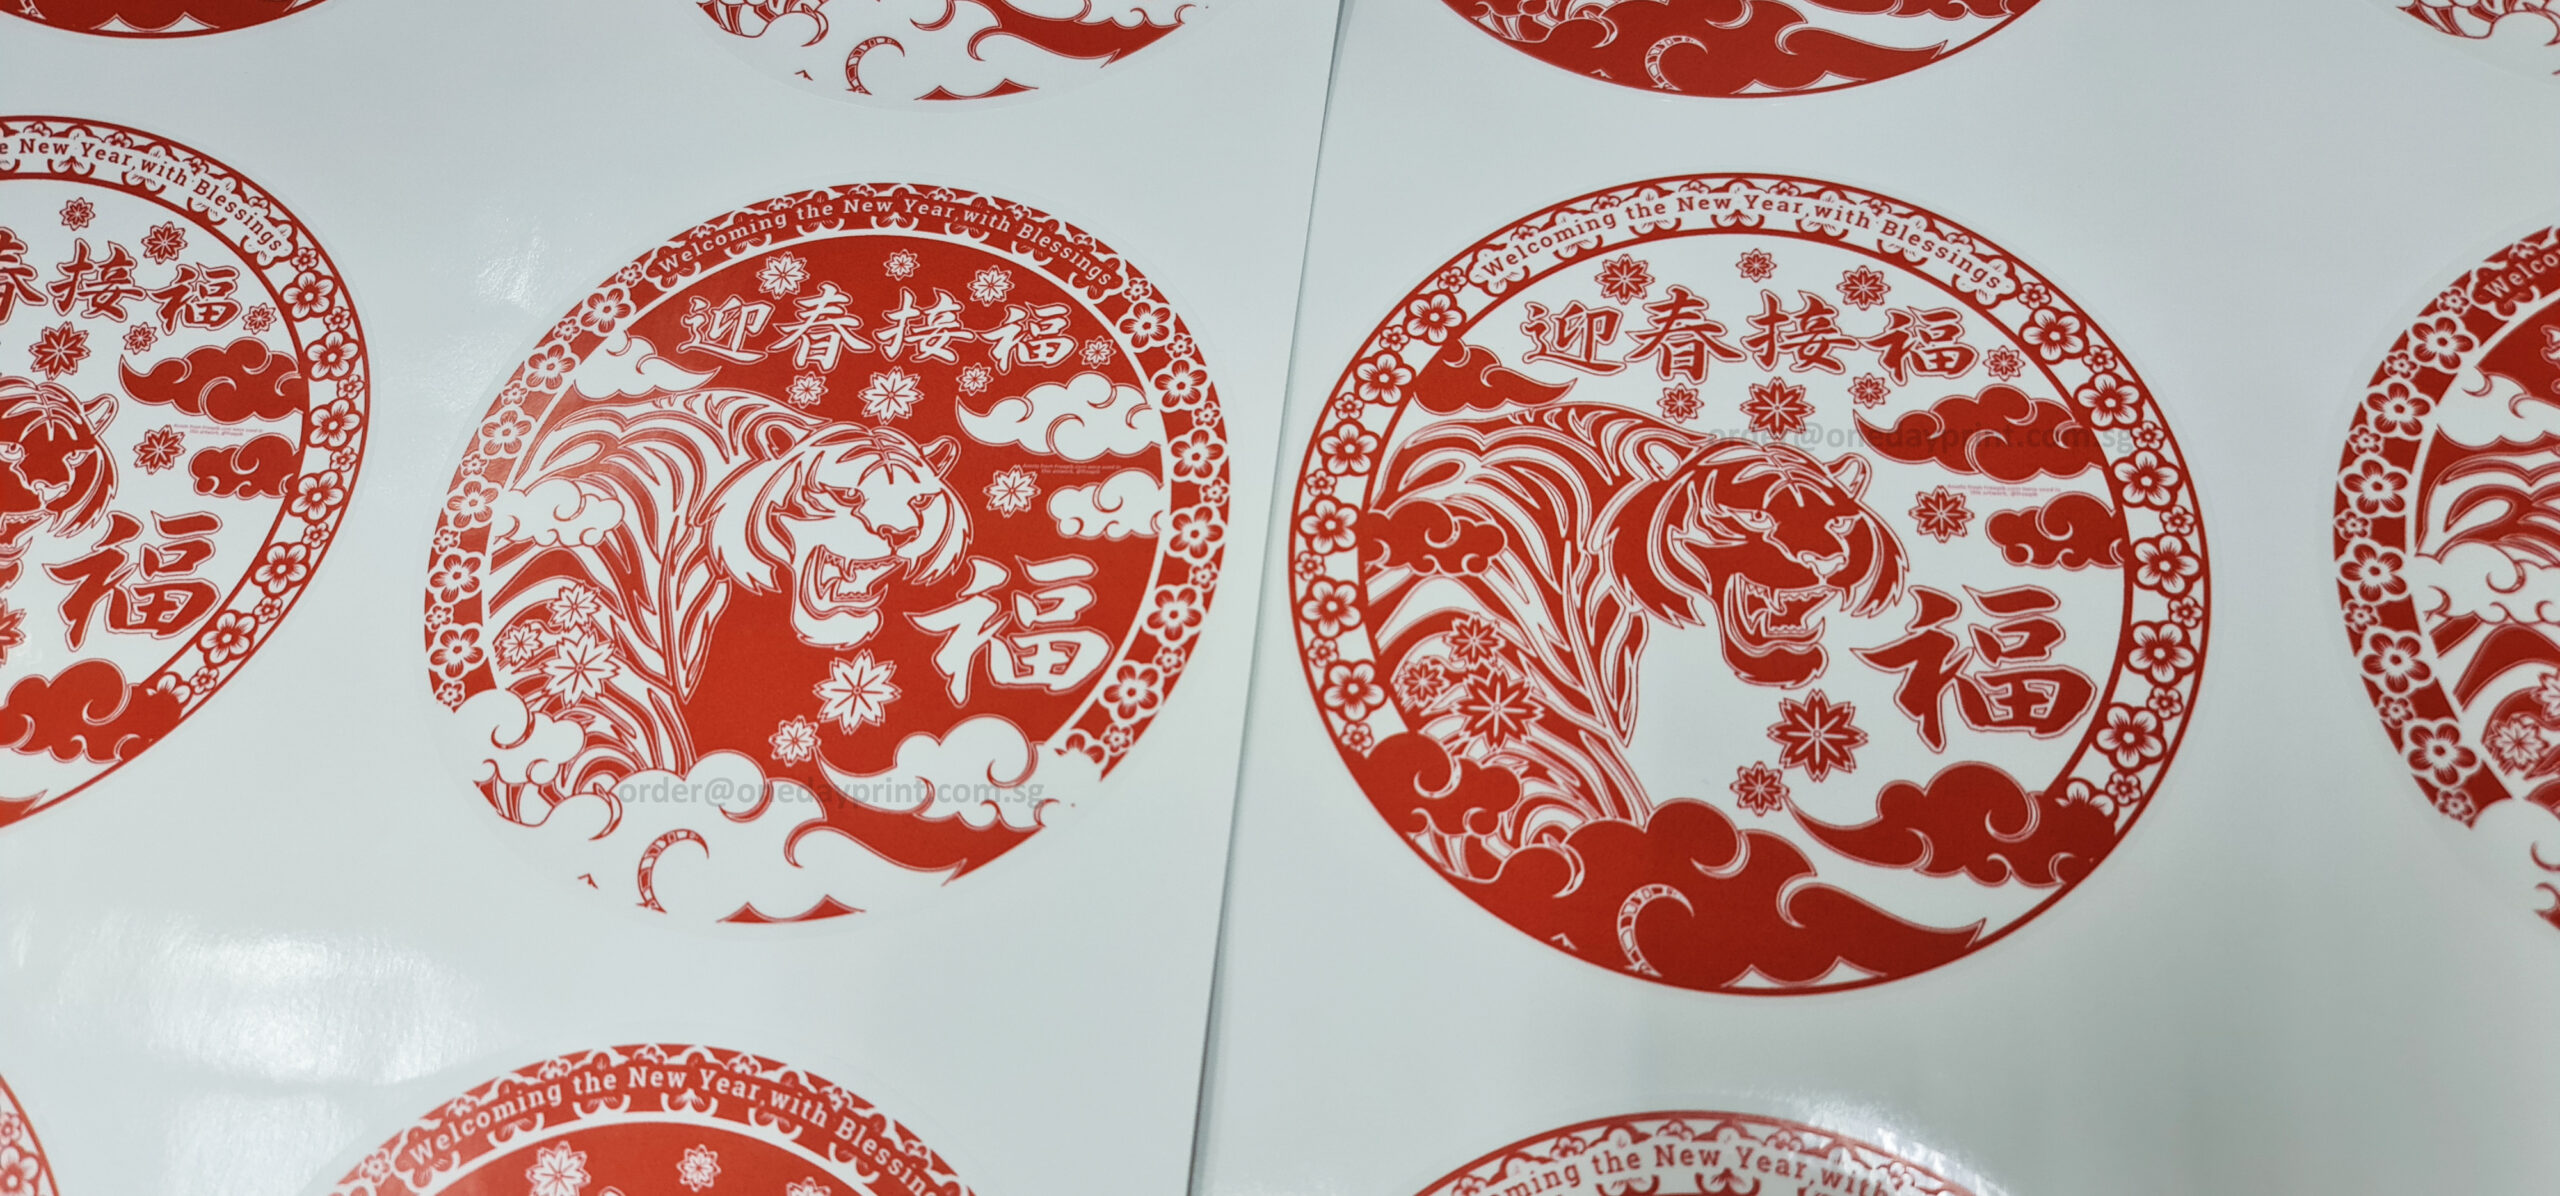 Round Shape Stickers, Transparent Sticker Material, Red on White Underlay Printing, CNY Stickers, Kiss-cut on sheet